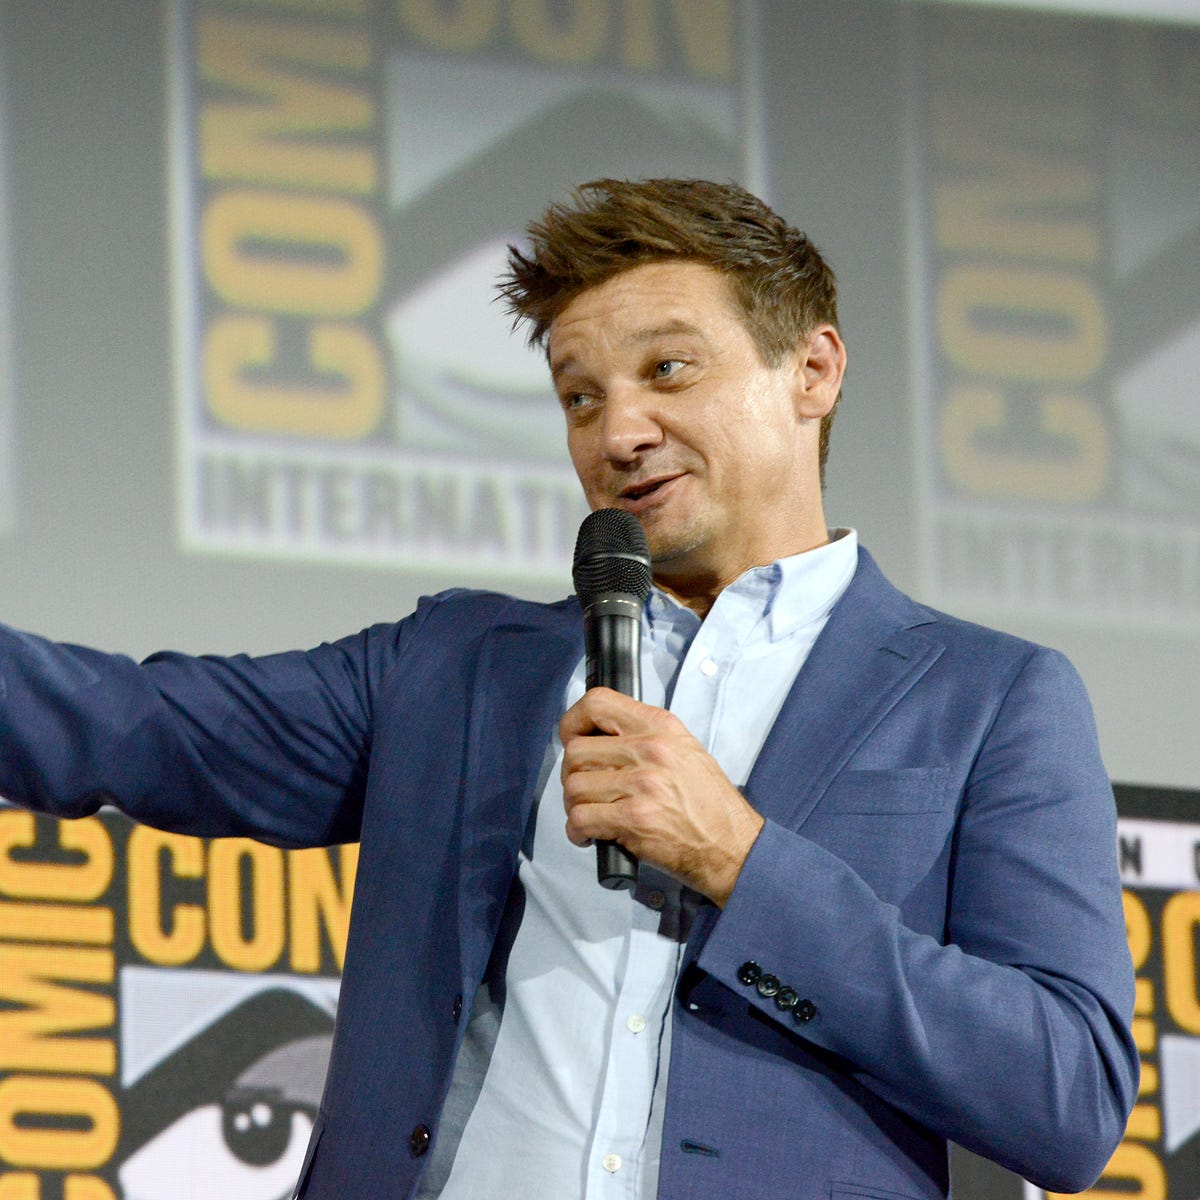 The Sketchy Economics Behind the Jeremy Renner App | by Sarah Emerson |  OneZero